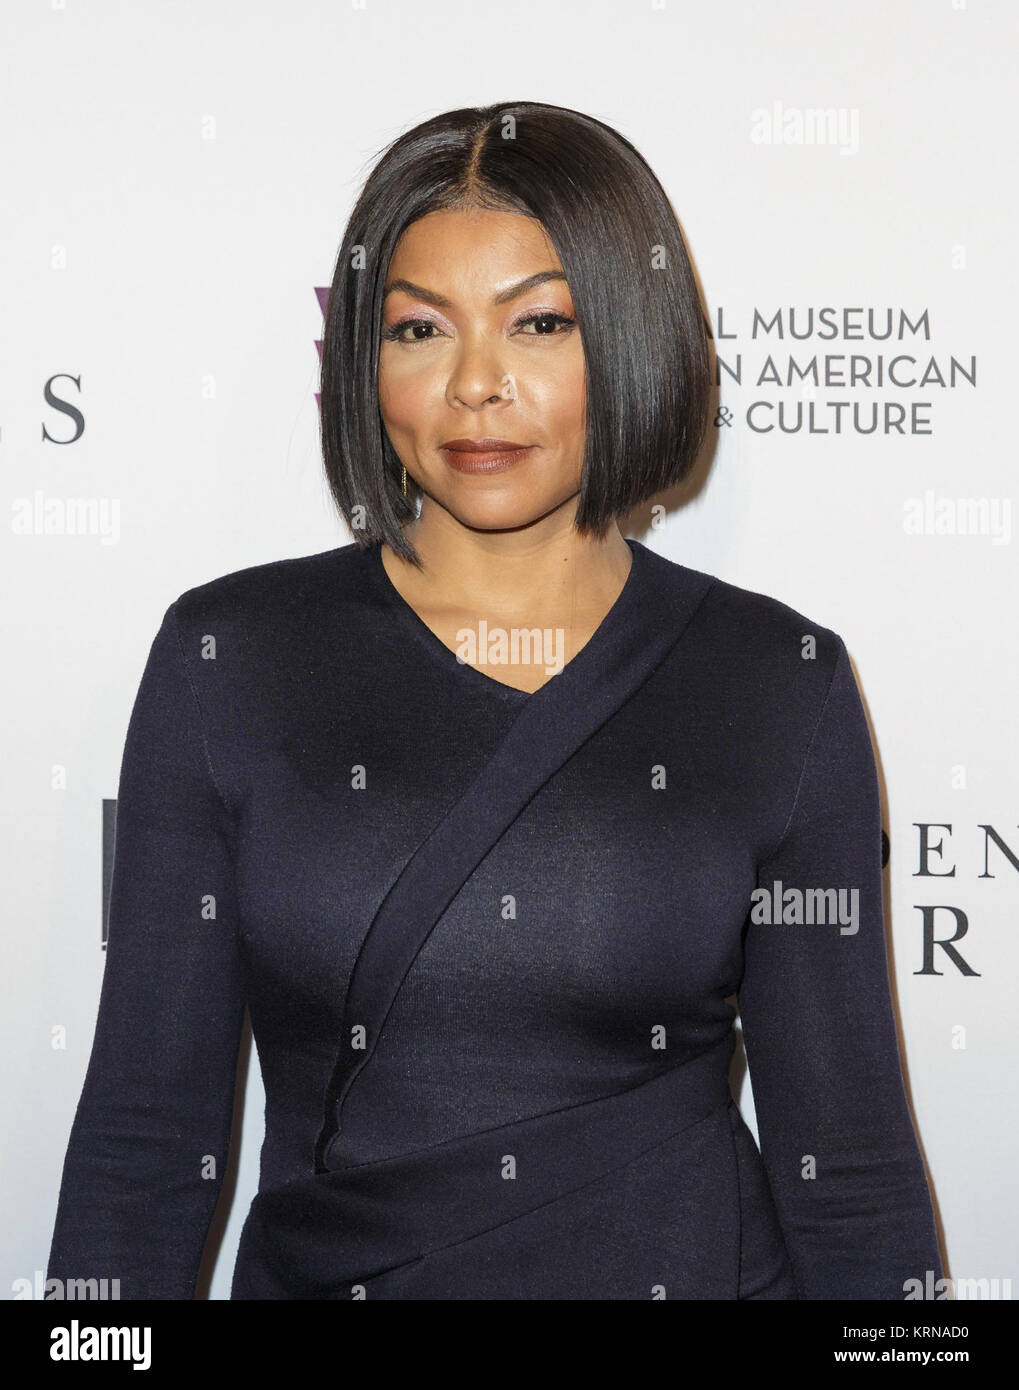 American actress and singer Taraji P. Henson arrives on the red carpet for a screening of the film “Hidden Figures” at the Smithsonian’s National Museum of African American History and Culture, Wednesday, Dec. 14, 2016 in Washington DC. The film is based on the book of the same title, by Margot Lee Shetterly, and chronicles the lives of Katherine Johnson, Dorothy Vaughan and Mary Jackson -- African-American women working at NASA as “human computers,” who were critical to the success of John Glenn’s Friendship 7 mission in 1962. Photo Credit: (NASA/Joel Kowsky) 22Hidden Figures22 Screening at N Stock Photo